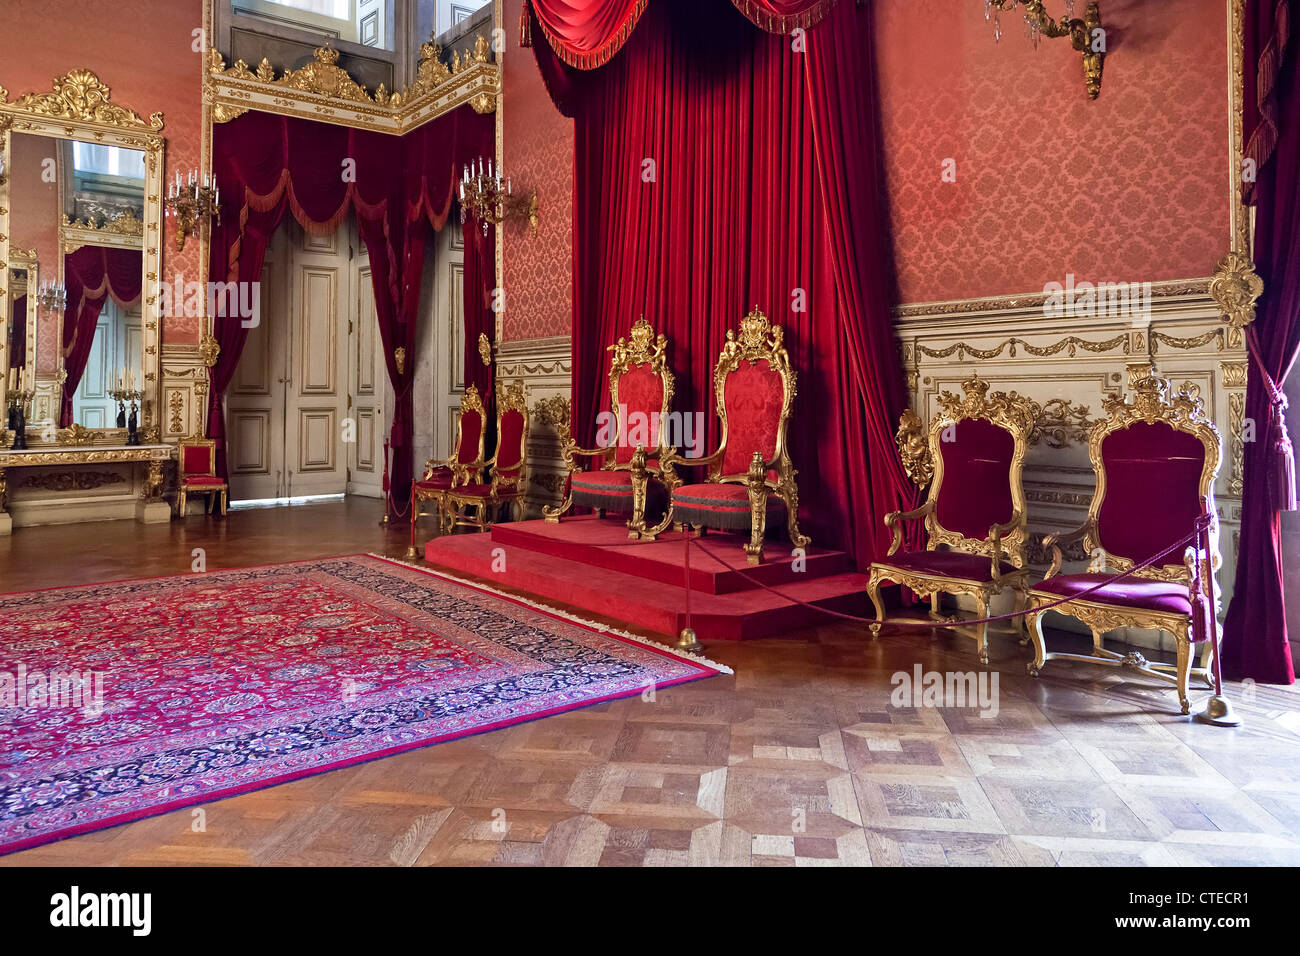 Throne Room of the Ajuda National Palace, Lisbon, Portugal. 19th century neoclassical Royal palace / throne thrones Throne Thrones king queen red Stock Photo